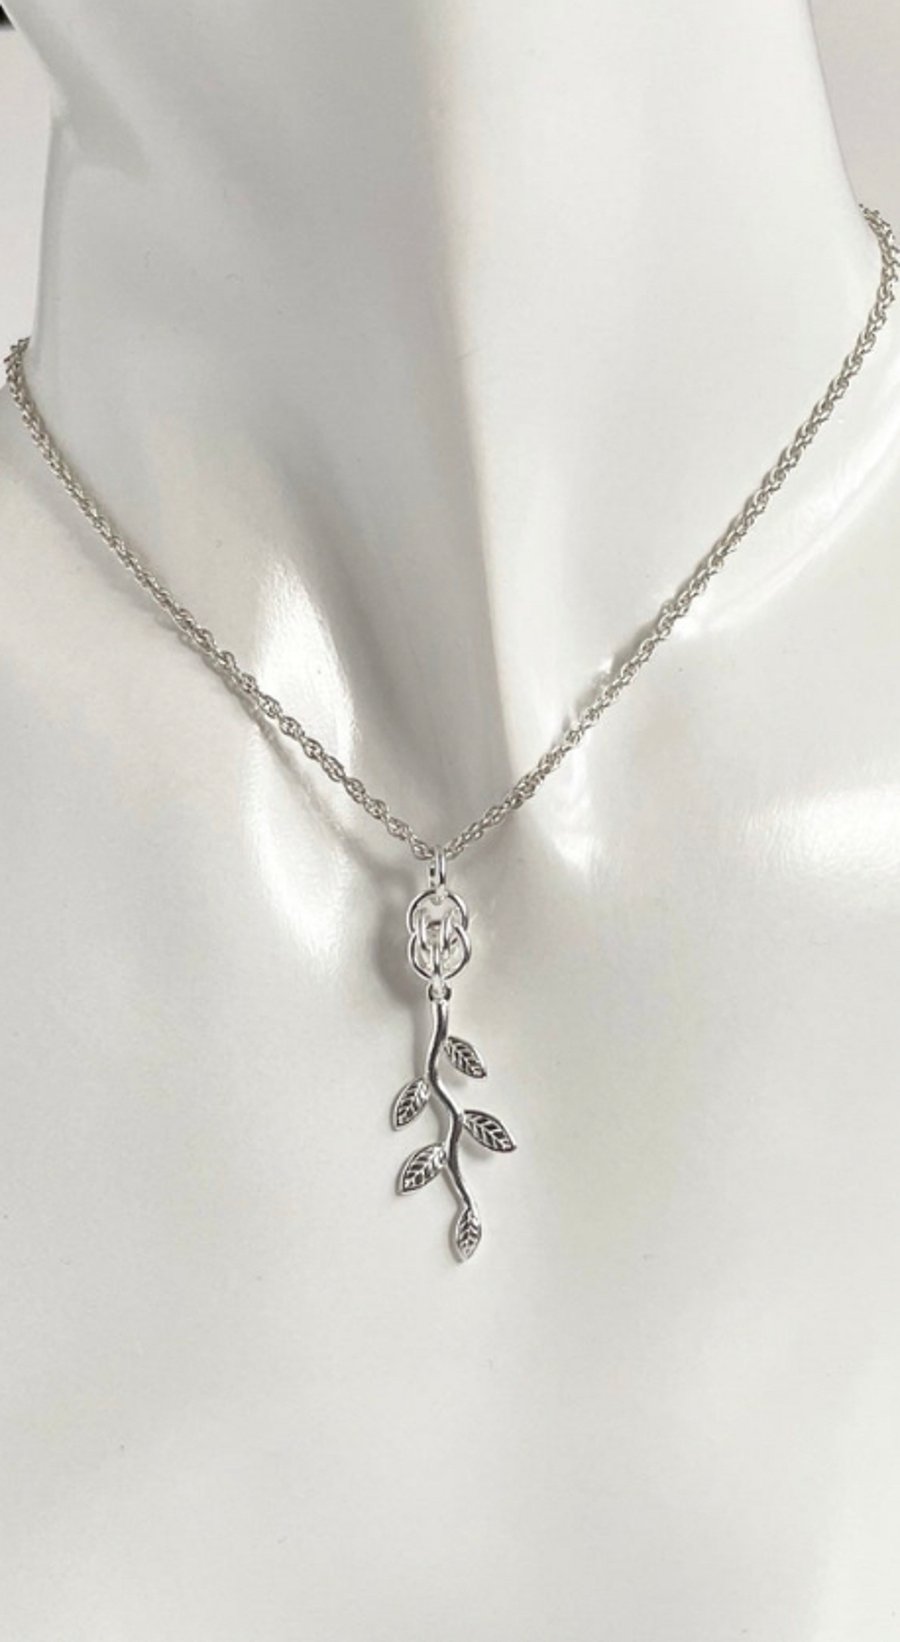 Leaf Sterling Silver Pendant Necklace with Sweet Pea Chainmaille and an 18 inch 